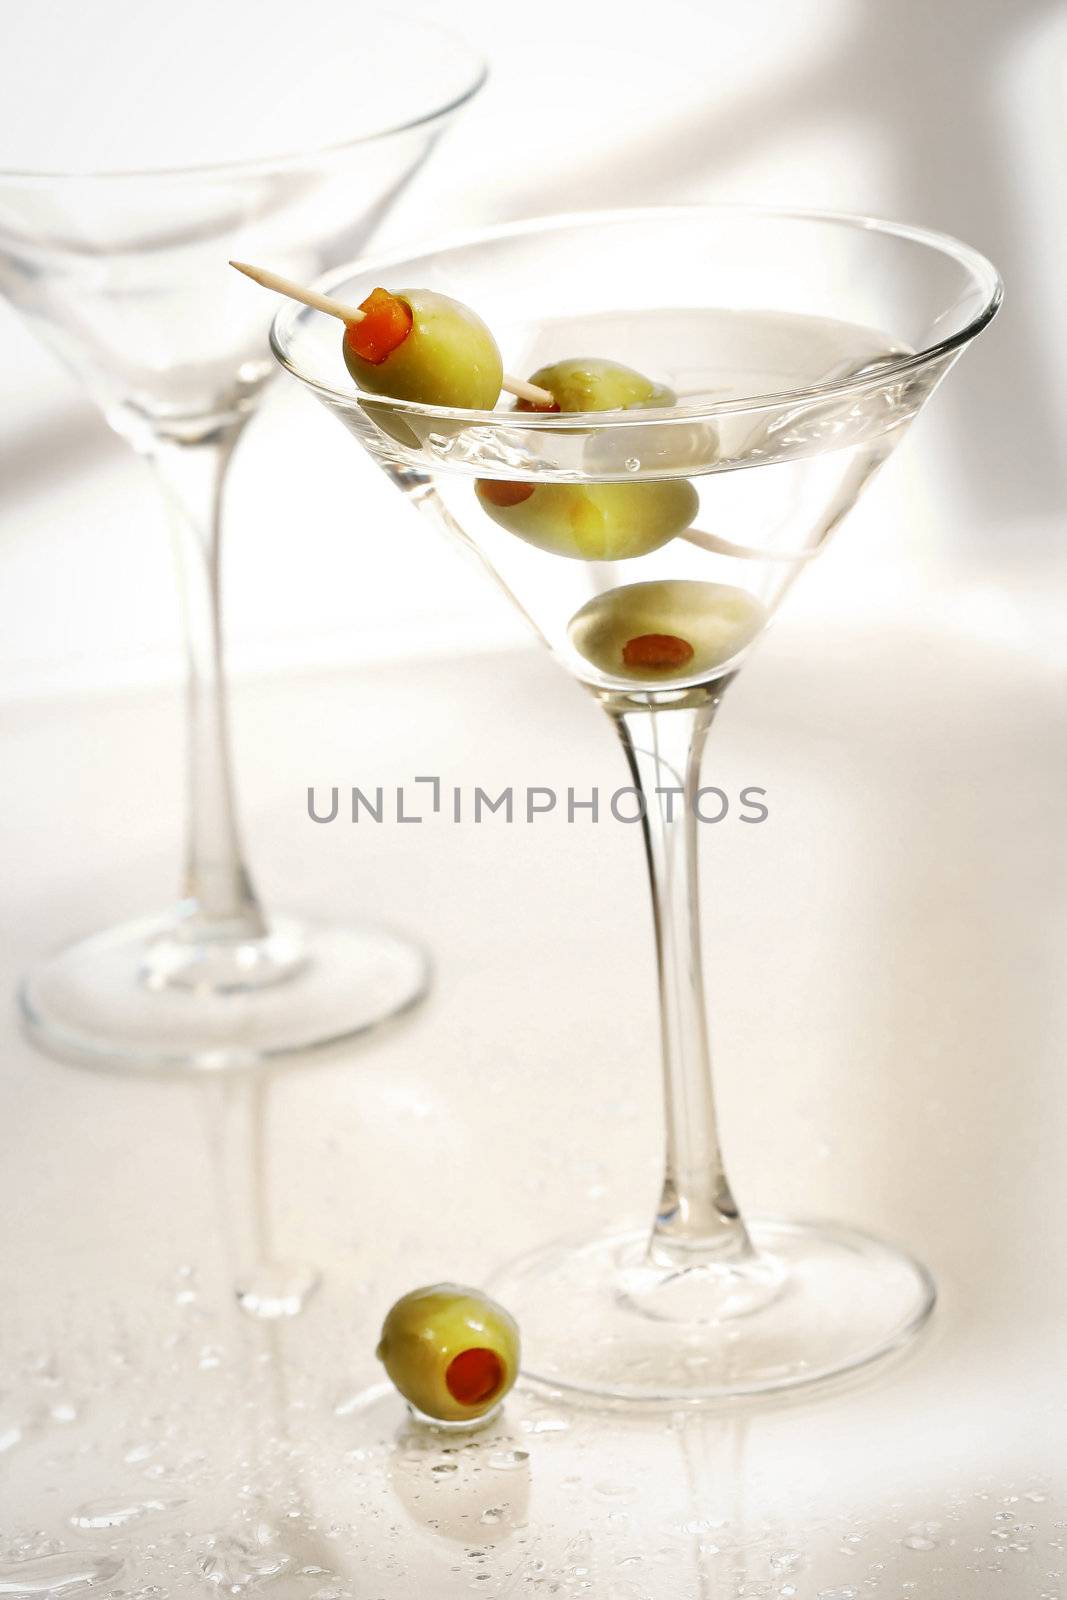 Martini and olives by Sandralise